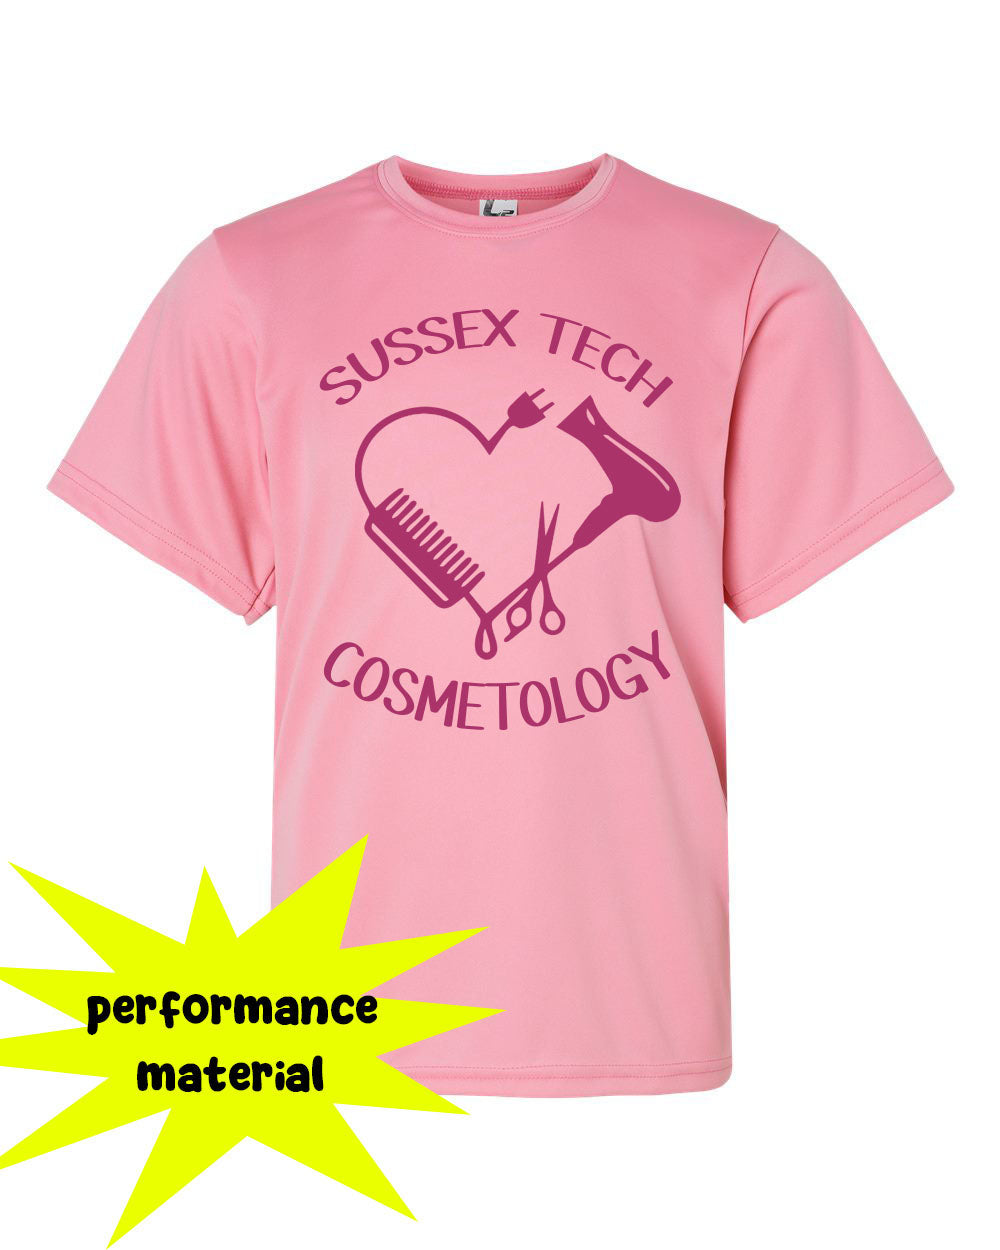 Sussex Tech Cosmetology Performance Material design 2 T-Shirt